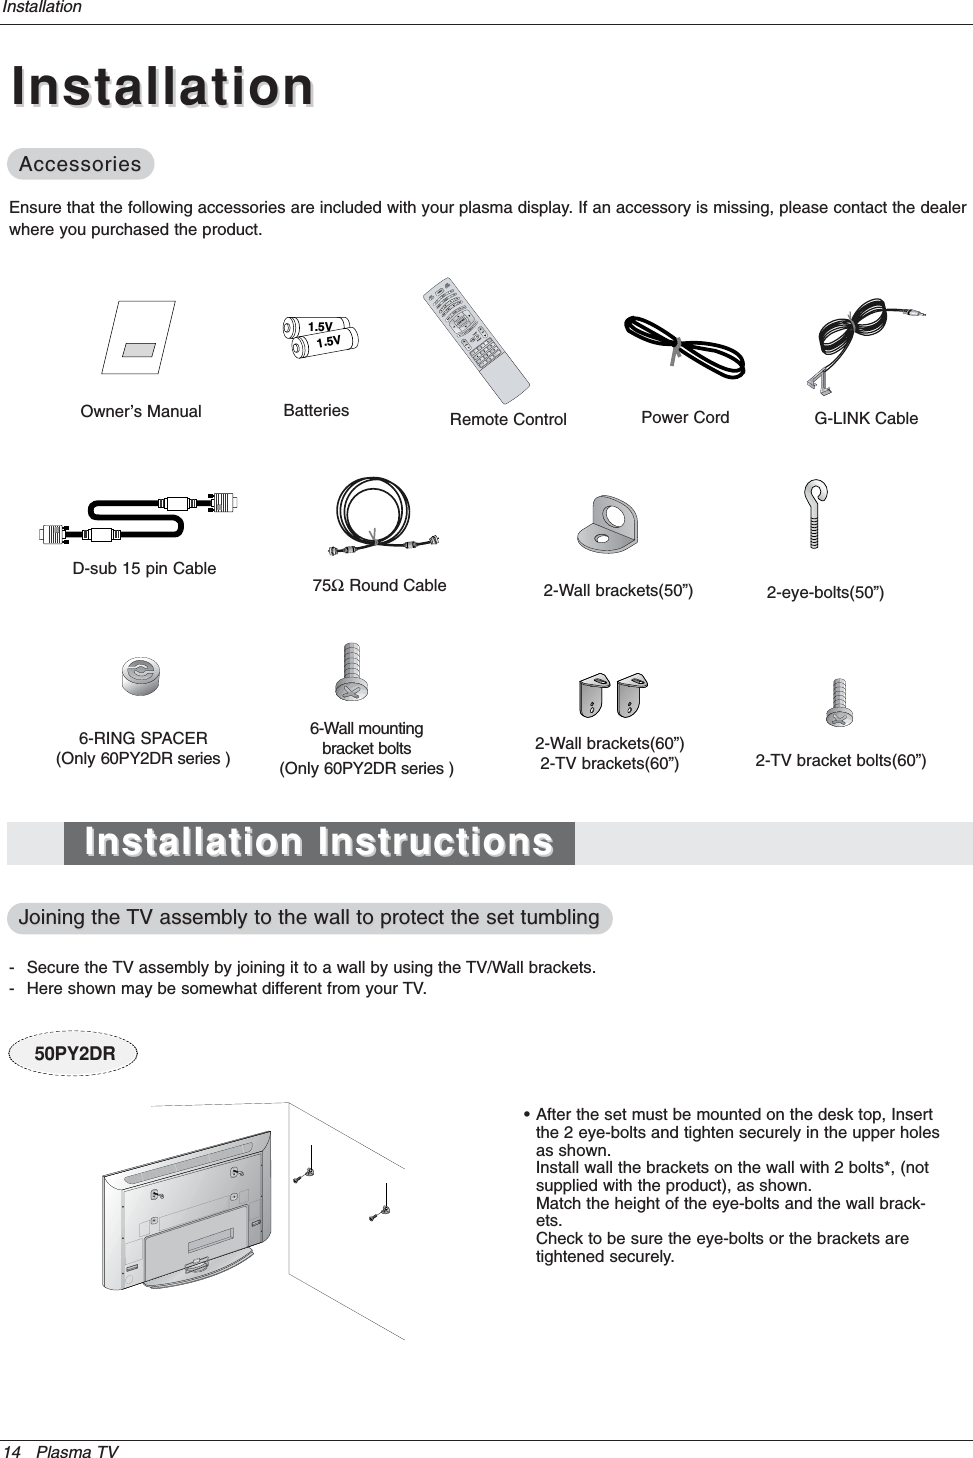 14 Plasma TVInstallationInstallationInstallationOwner’s Manual1.5V1.5VBatteries Power CordMODEDAY -DAY+FLASHBKAPCCAUTODEMOTV INPU75ΩRound CableEnsure that the following accessories are included with your plasma display. If an accessory is missing, please contact the dealerwhere you purchased the product.2-Wall brackets(60”)2-TV brackets(60”)G-LINK Cable2-TV bracket bolts(60”)Remote ControlInstallation InstructionsInstallation InstructionsAccessoriesAccessories- Secure the TV assembly by joining it to a wall by using the TV/Wall brackets.- Here shown may be somewhat different from your TV.Joining the Joining the TV assembly to the wall to protect the set tumblingTV assembly to the wall to protect the set tumbling• After the set must be mounted on the desk top, Insert the 2 eye-bolts and tighten securely in the upper holesas shown.Install wall the brackets on the wall with 2 bolts*, (not supplied with the product), as shown.Match the height of the eye-bolts and the wall brack-ets.Check to be sure the eye-bolts or the brackets are tightened securely.6-RING SPACER(Only 60PY2DR series )6-Wall mounting bracket bolts(Only 60PY2DR series )D-sub 15 pin Cable2-Wall brackets(50”) 2-eye-bolts(50”)50PY2DR